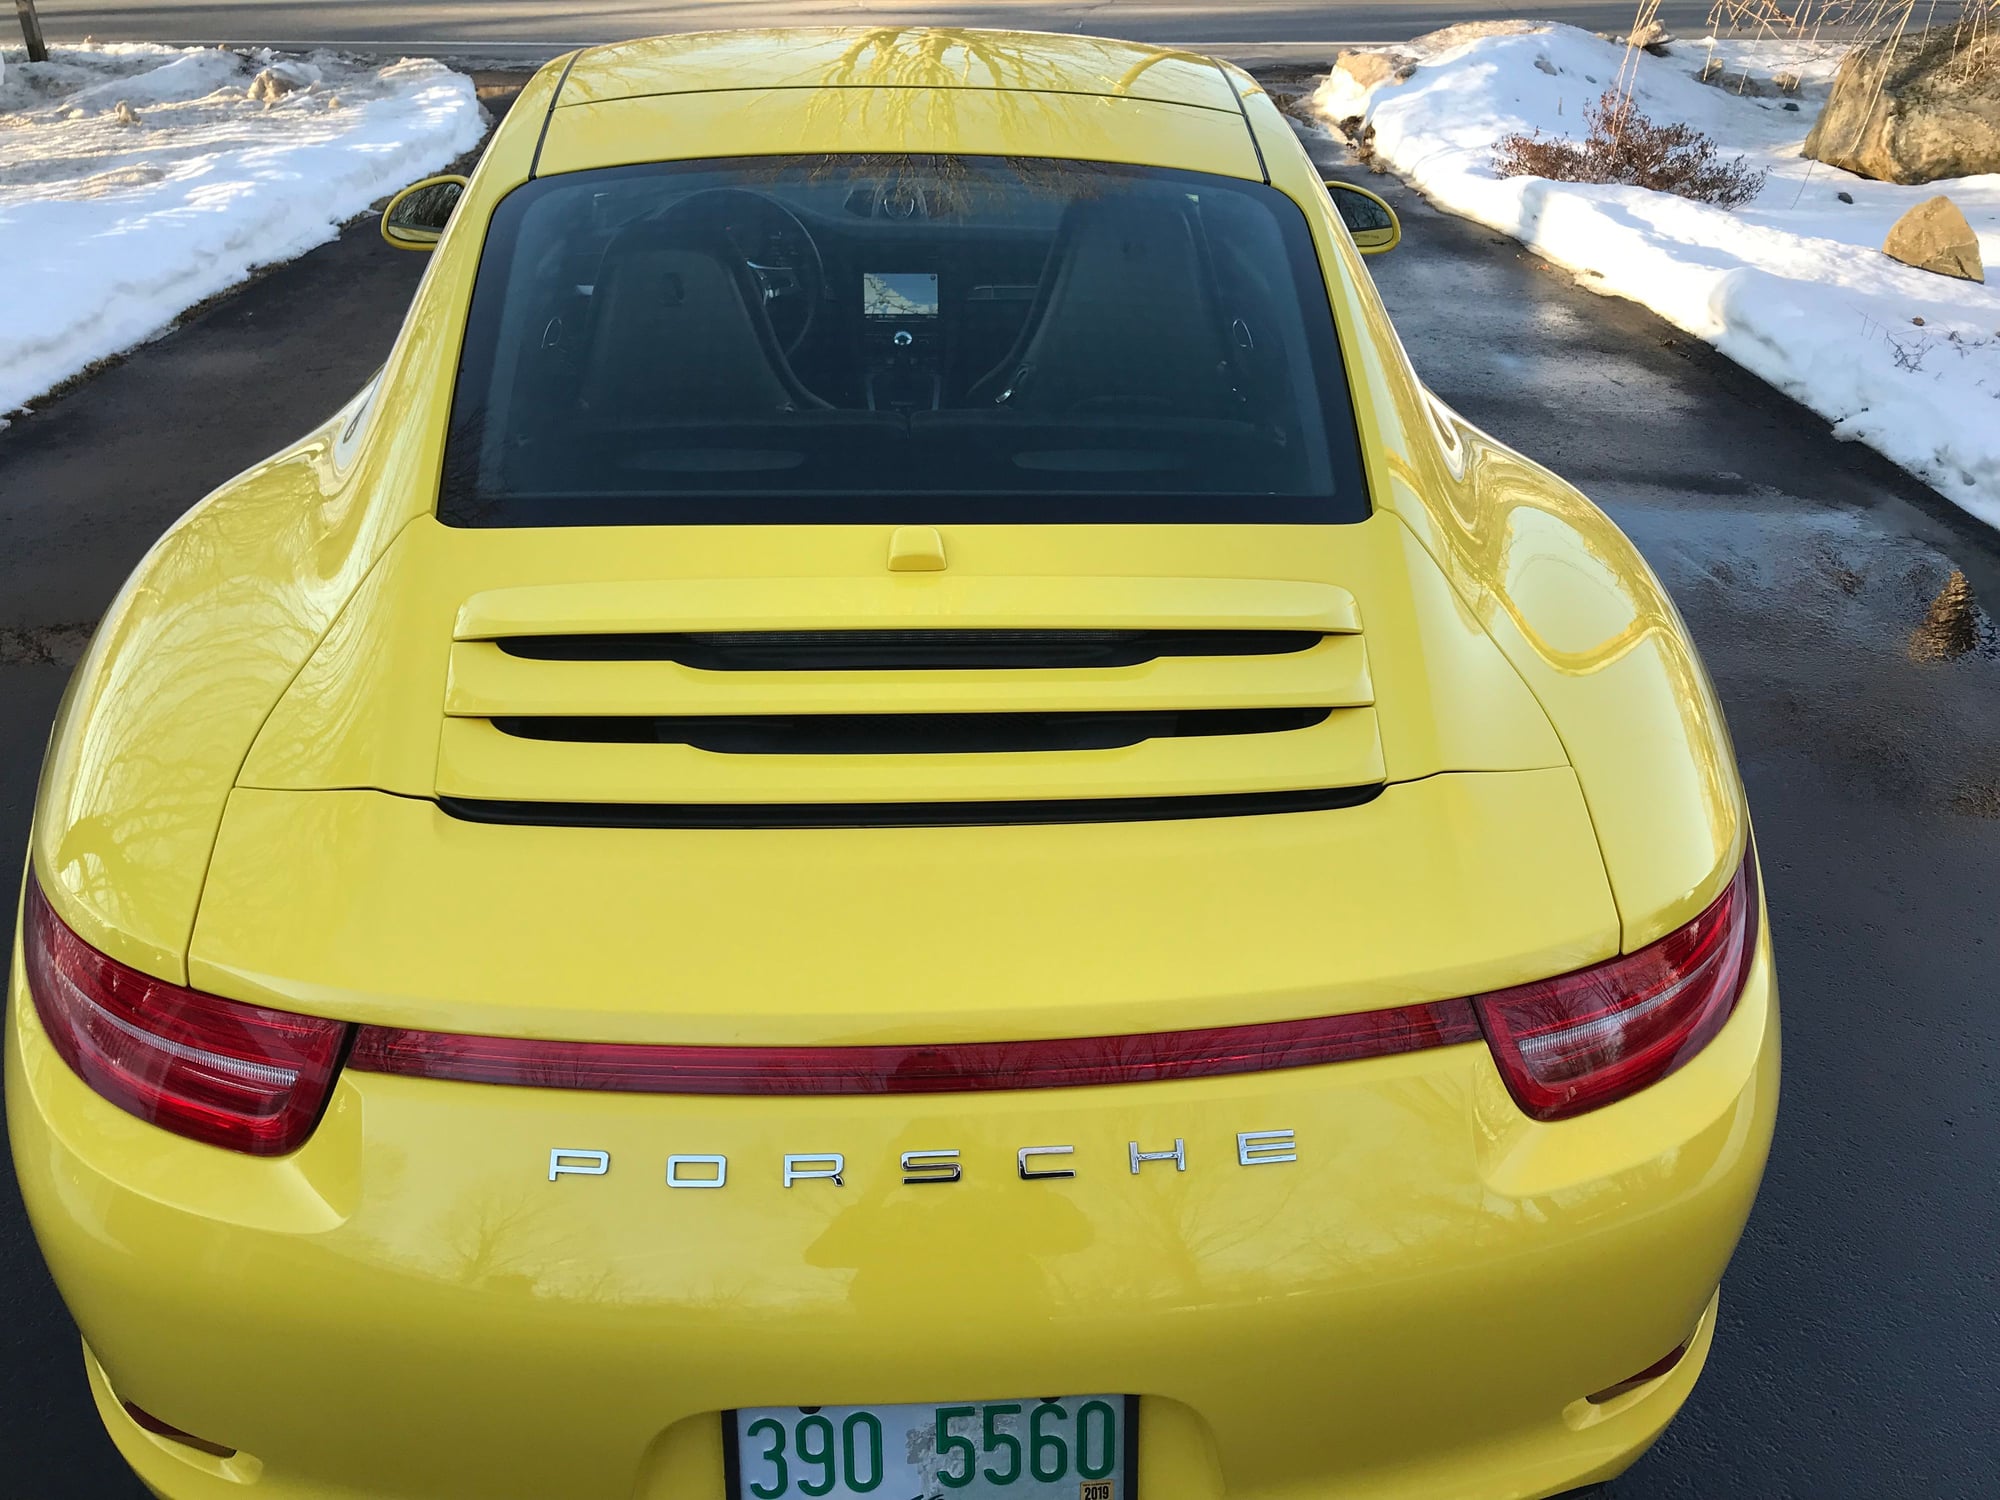 2013 Porsche 911 - 2013 Porsche 911 4S Racing Yellow - 7 Speed Manual - Used - VIN WP0AB2A90DS120897 - 18,300 Miles - 6 cyl - 4WD - Manual - Coupe - Yellow - North Hampton, NH 03862, United States